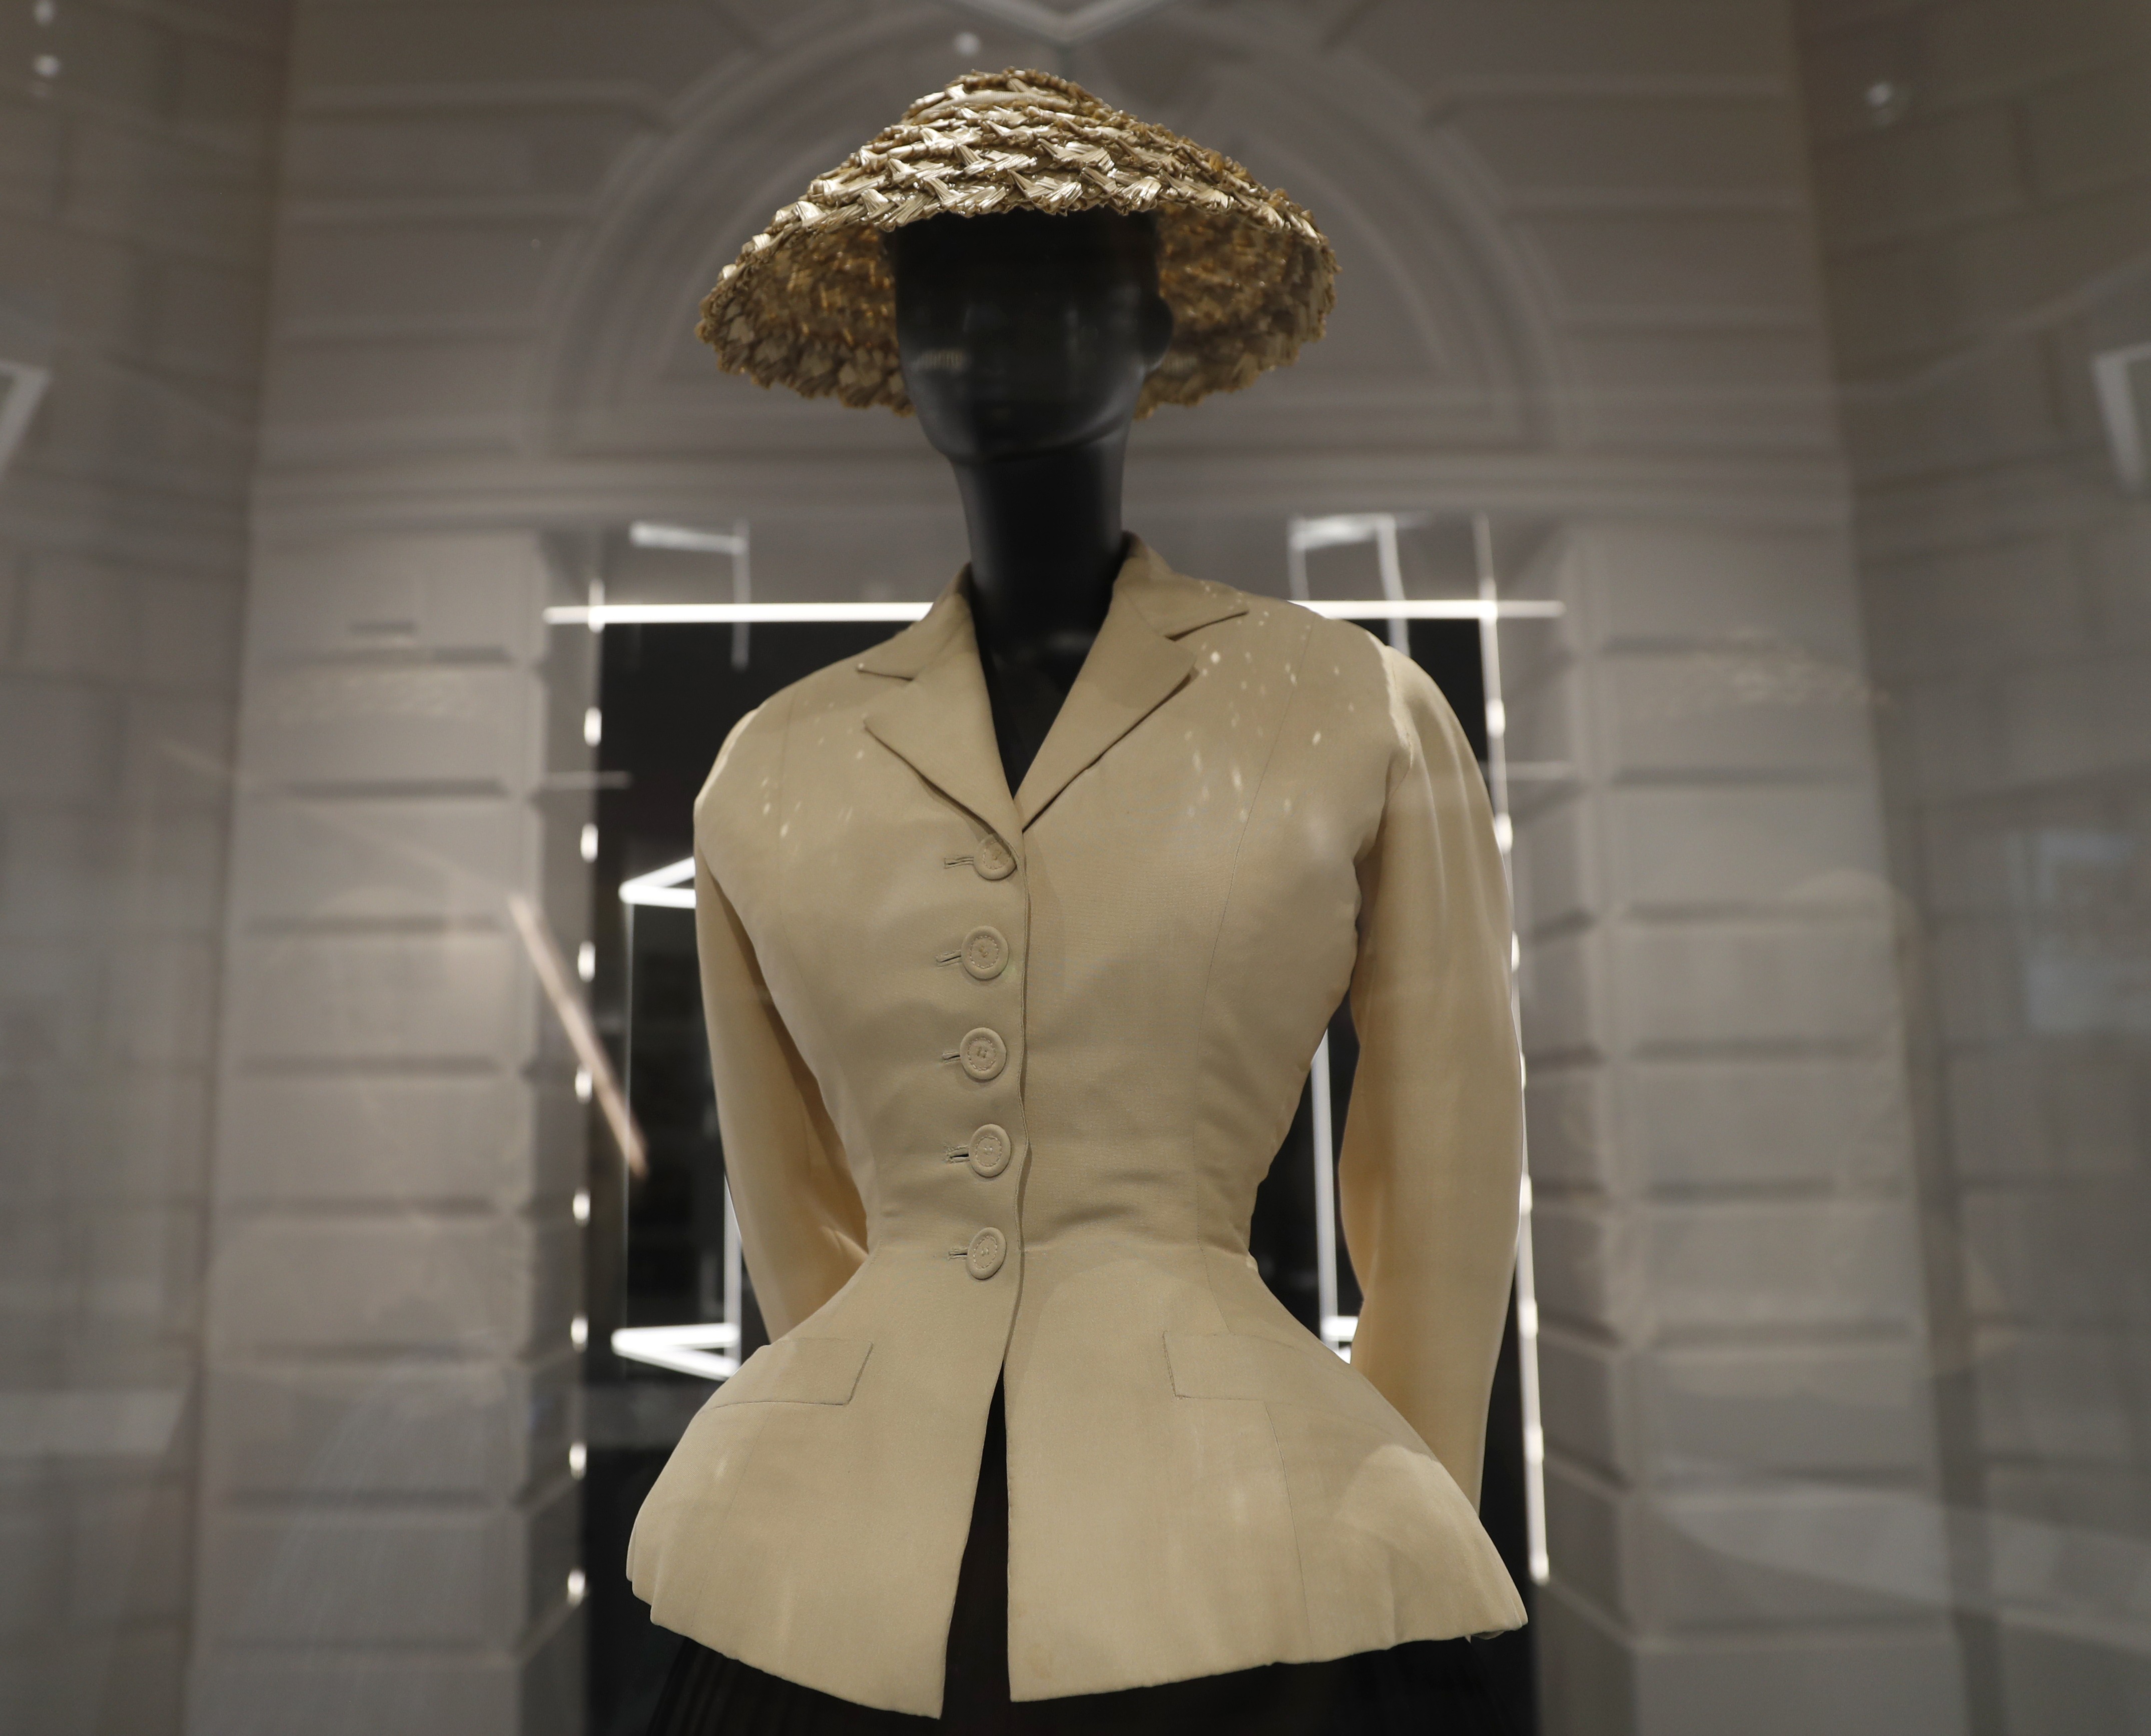 Christian Dior: Designer of Dreams”: Victoria and Albert Museum in London  welcomes largest ever Dior exhibition in the UK - LVMH